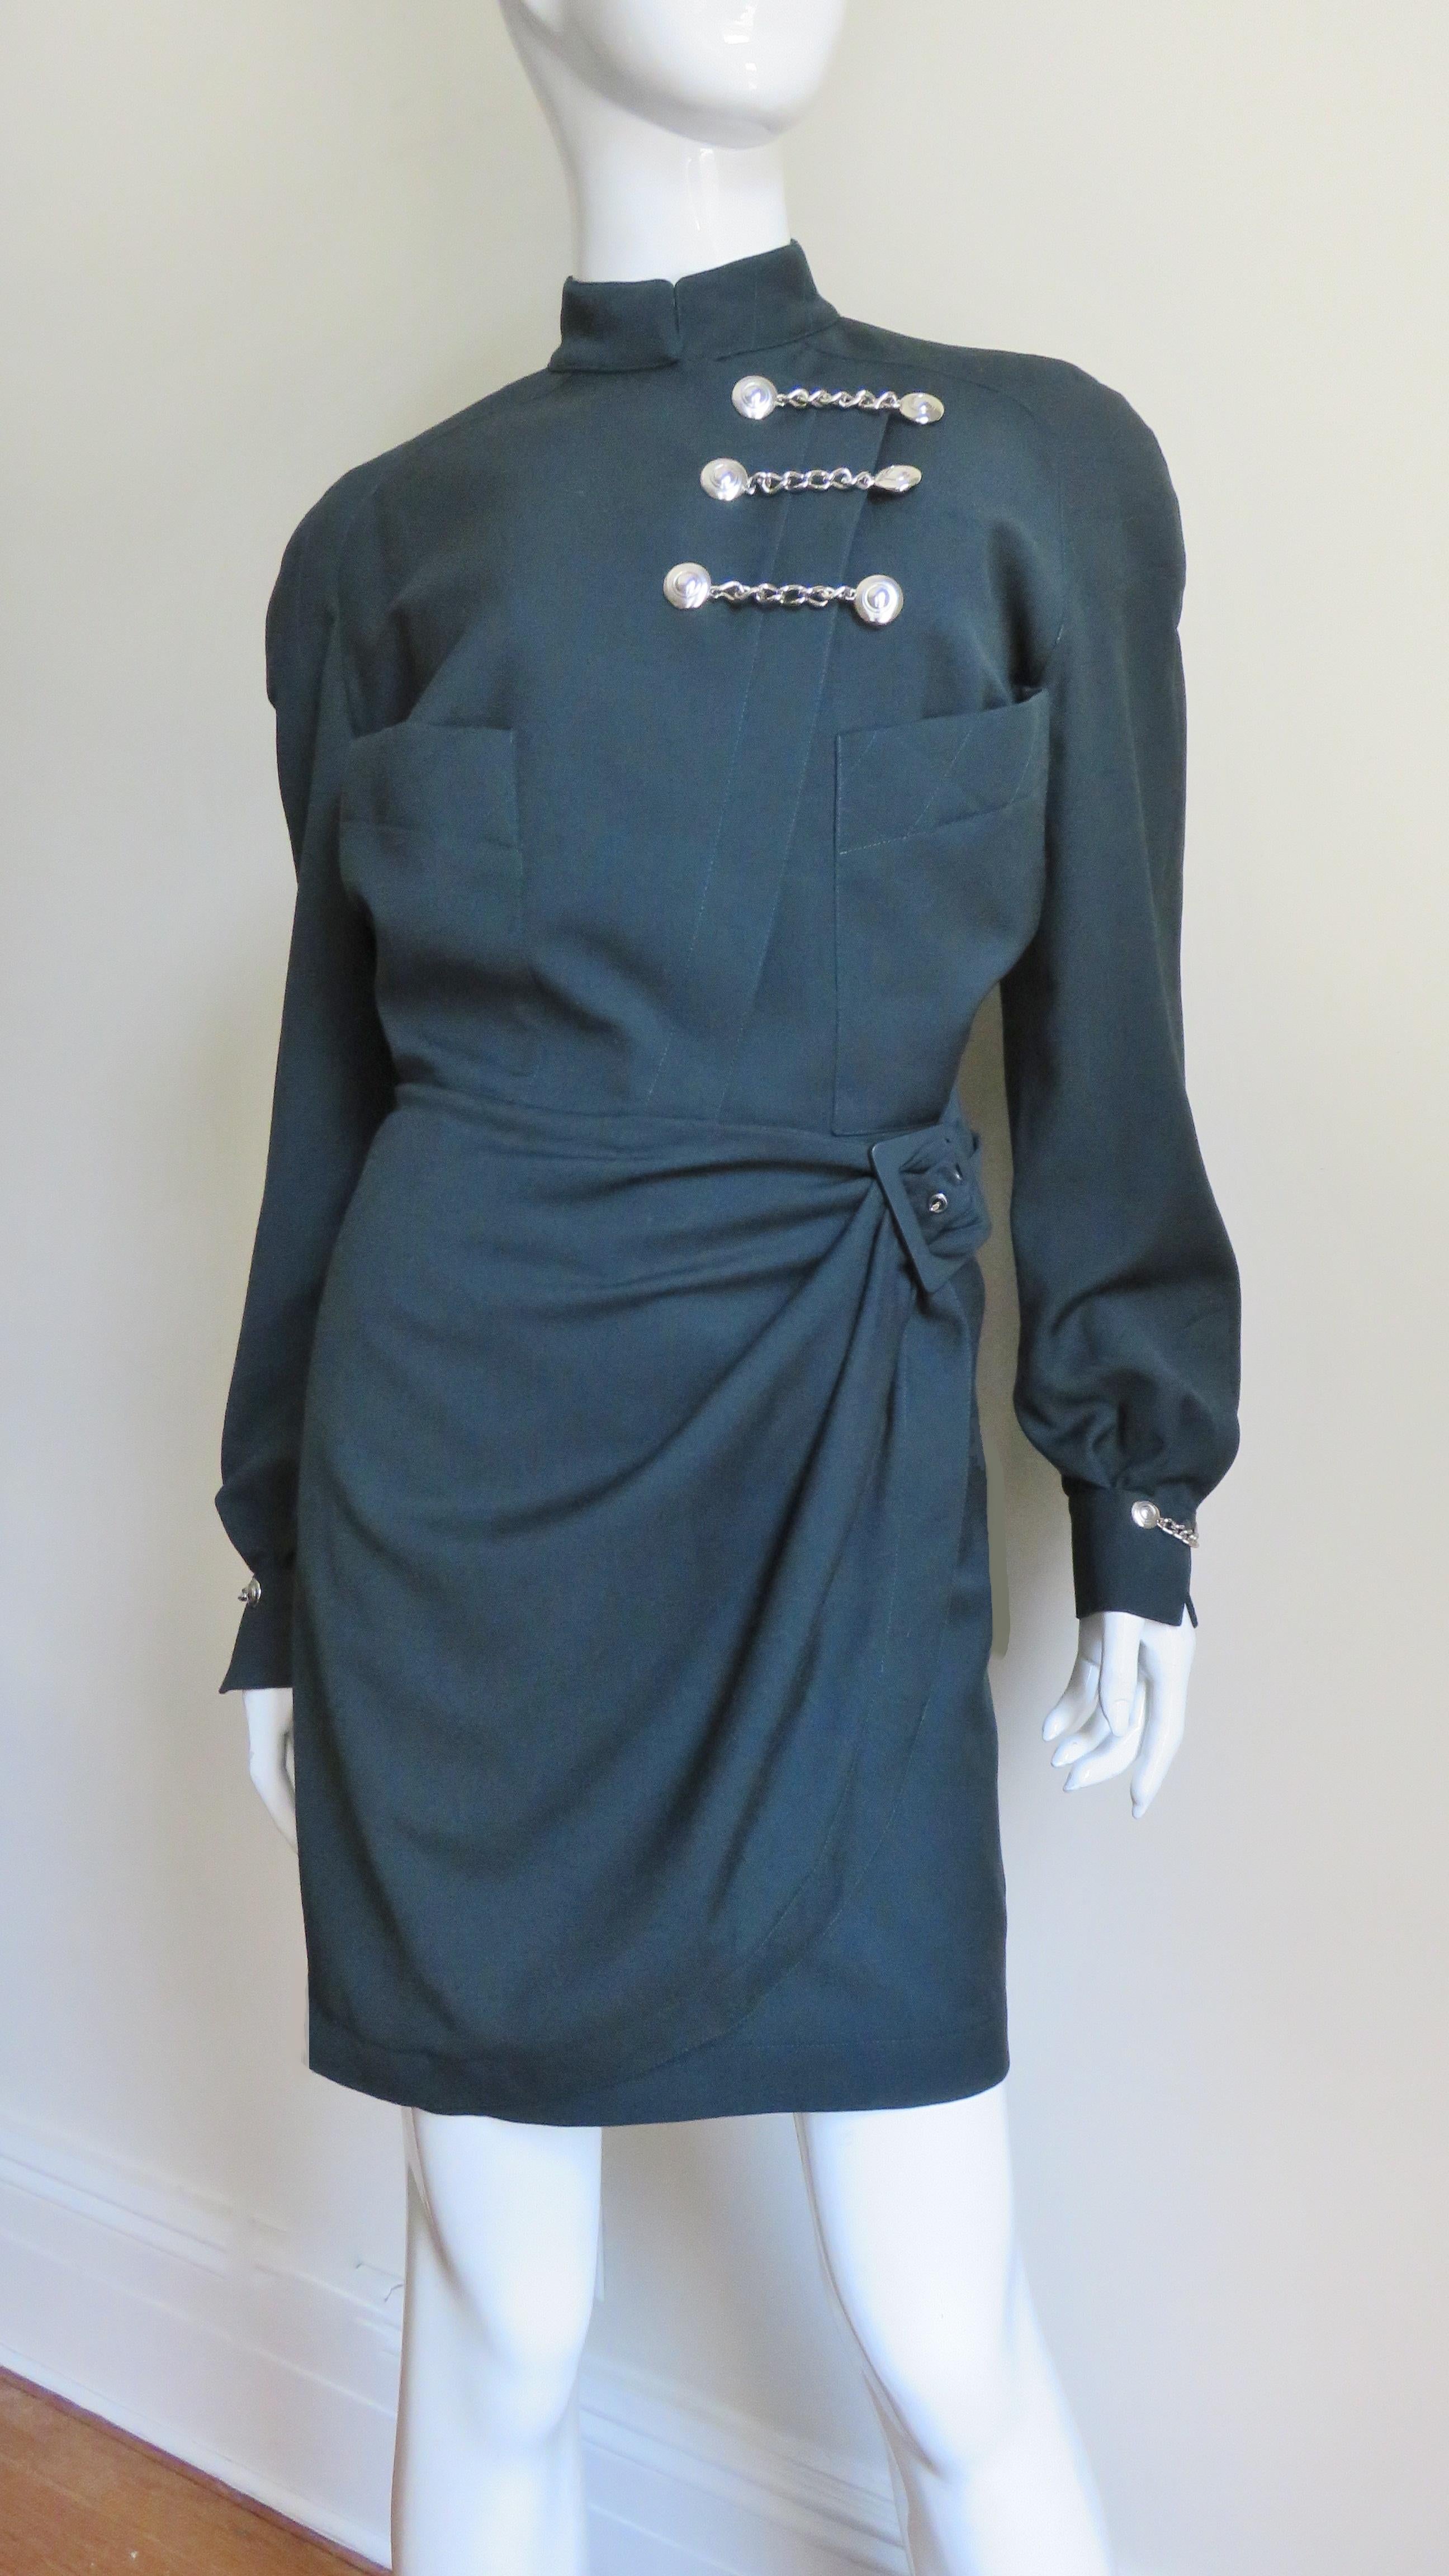 A fabulous forest green wool military influence dress by Thierry Mugler.  It has a small stand up collar, long sleeves with cuffs and 2 bodice patch pockets. The dress skirt wraps across the front closing at the side with a matching green buckle. 